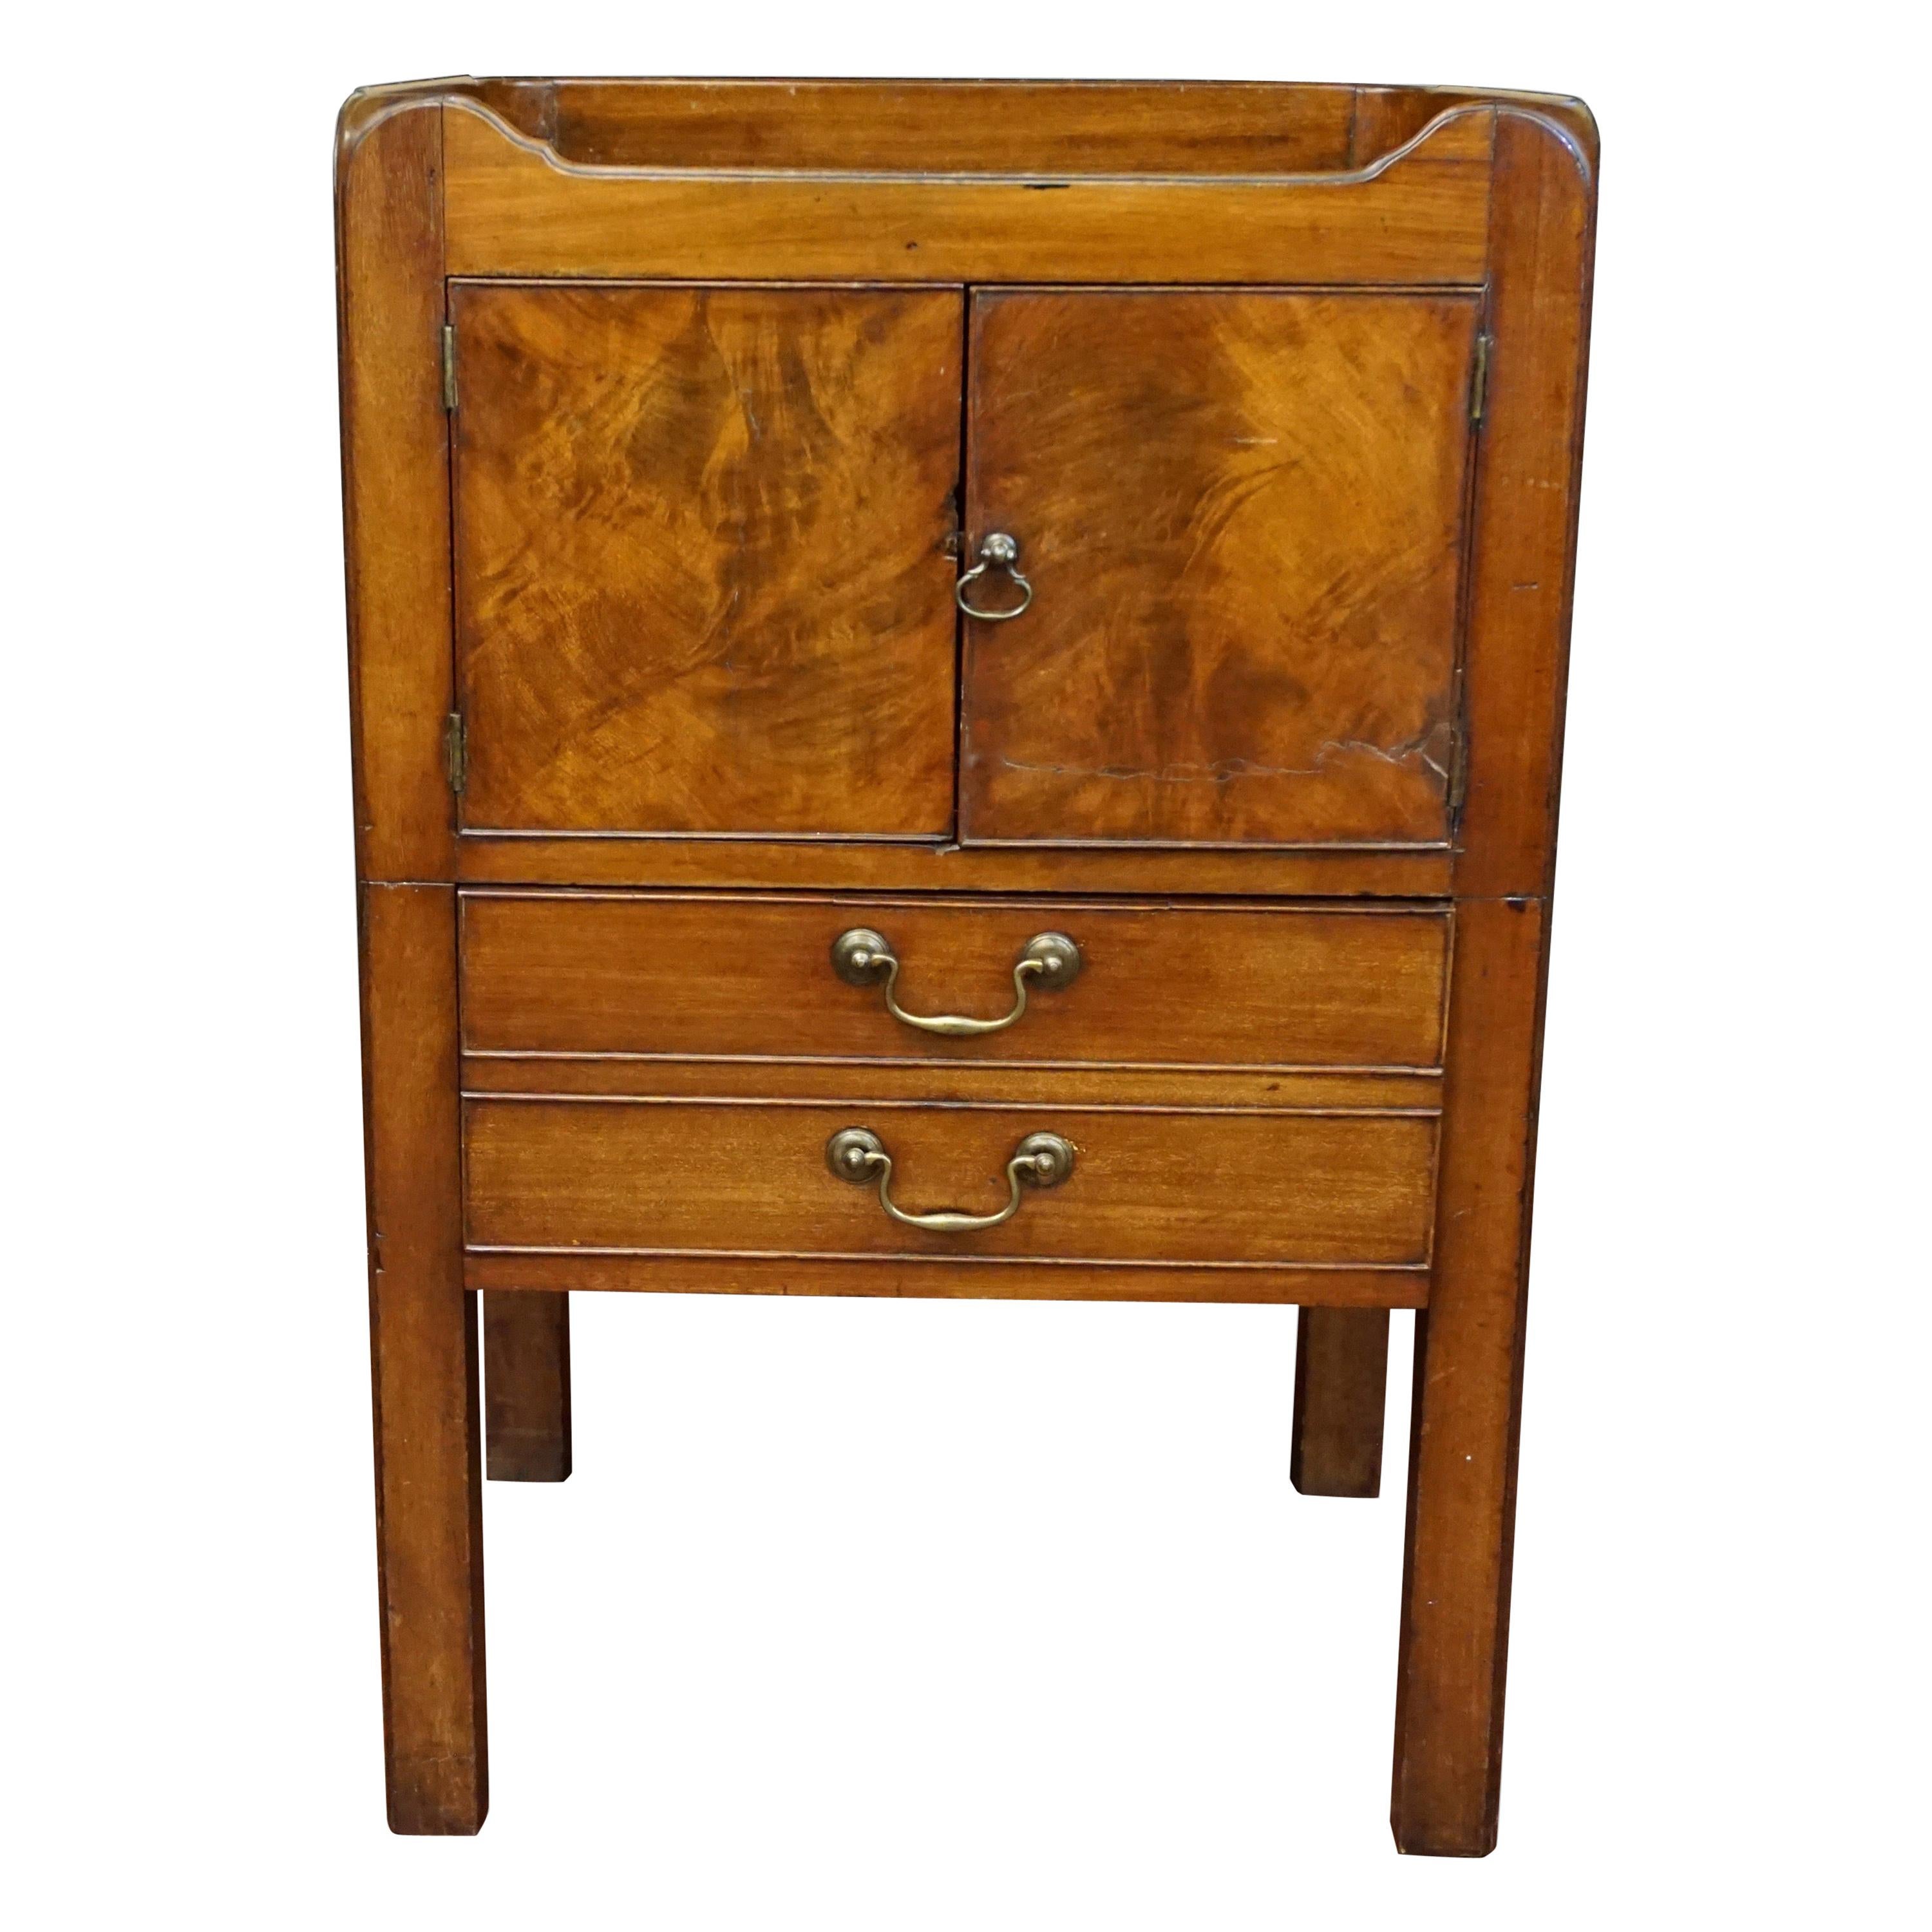 English George III Figured Mahogany Bedside Commode with Drawer